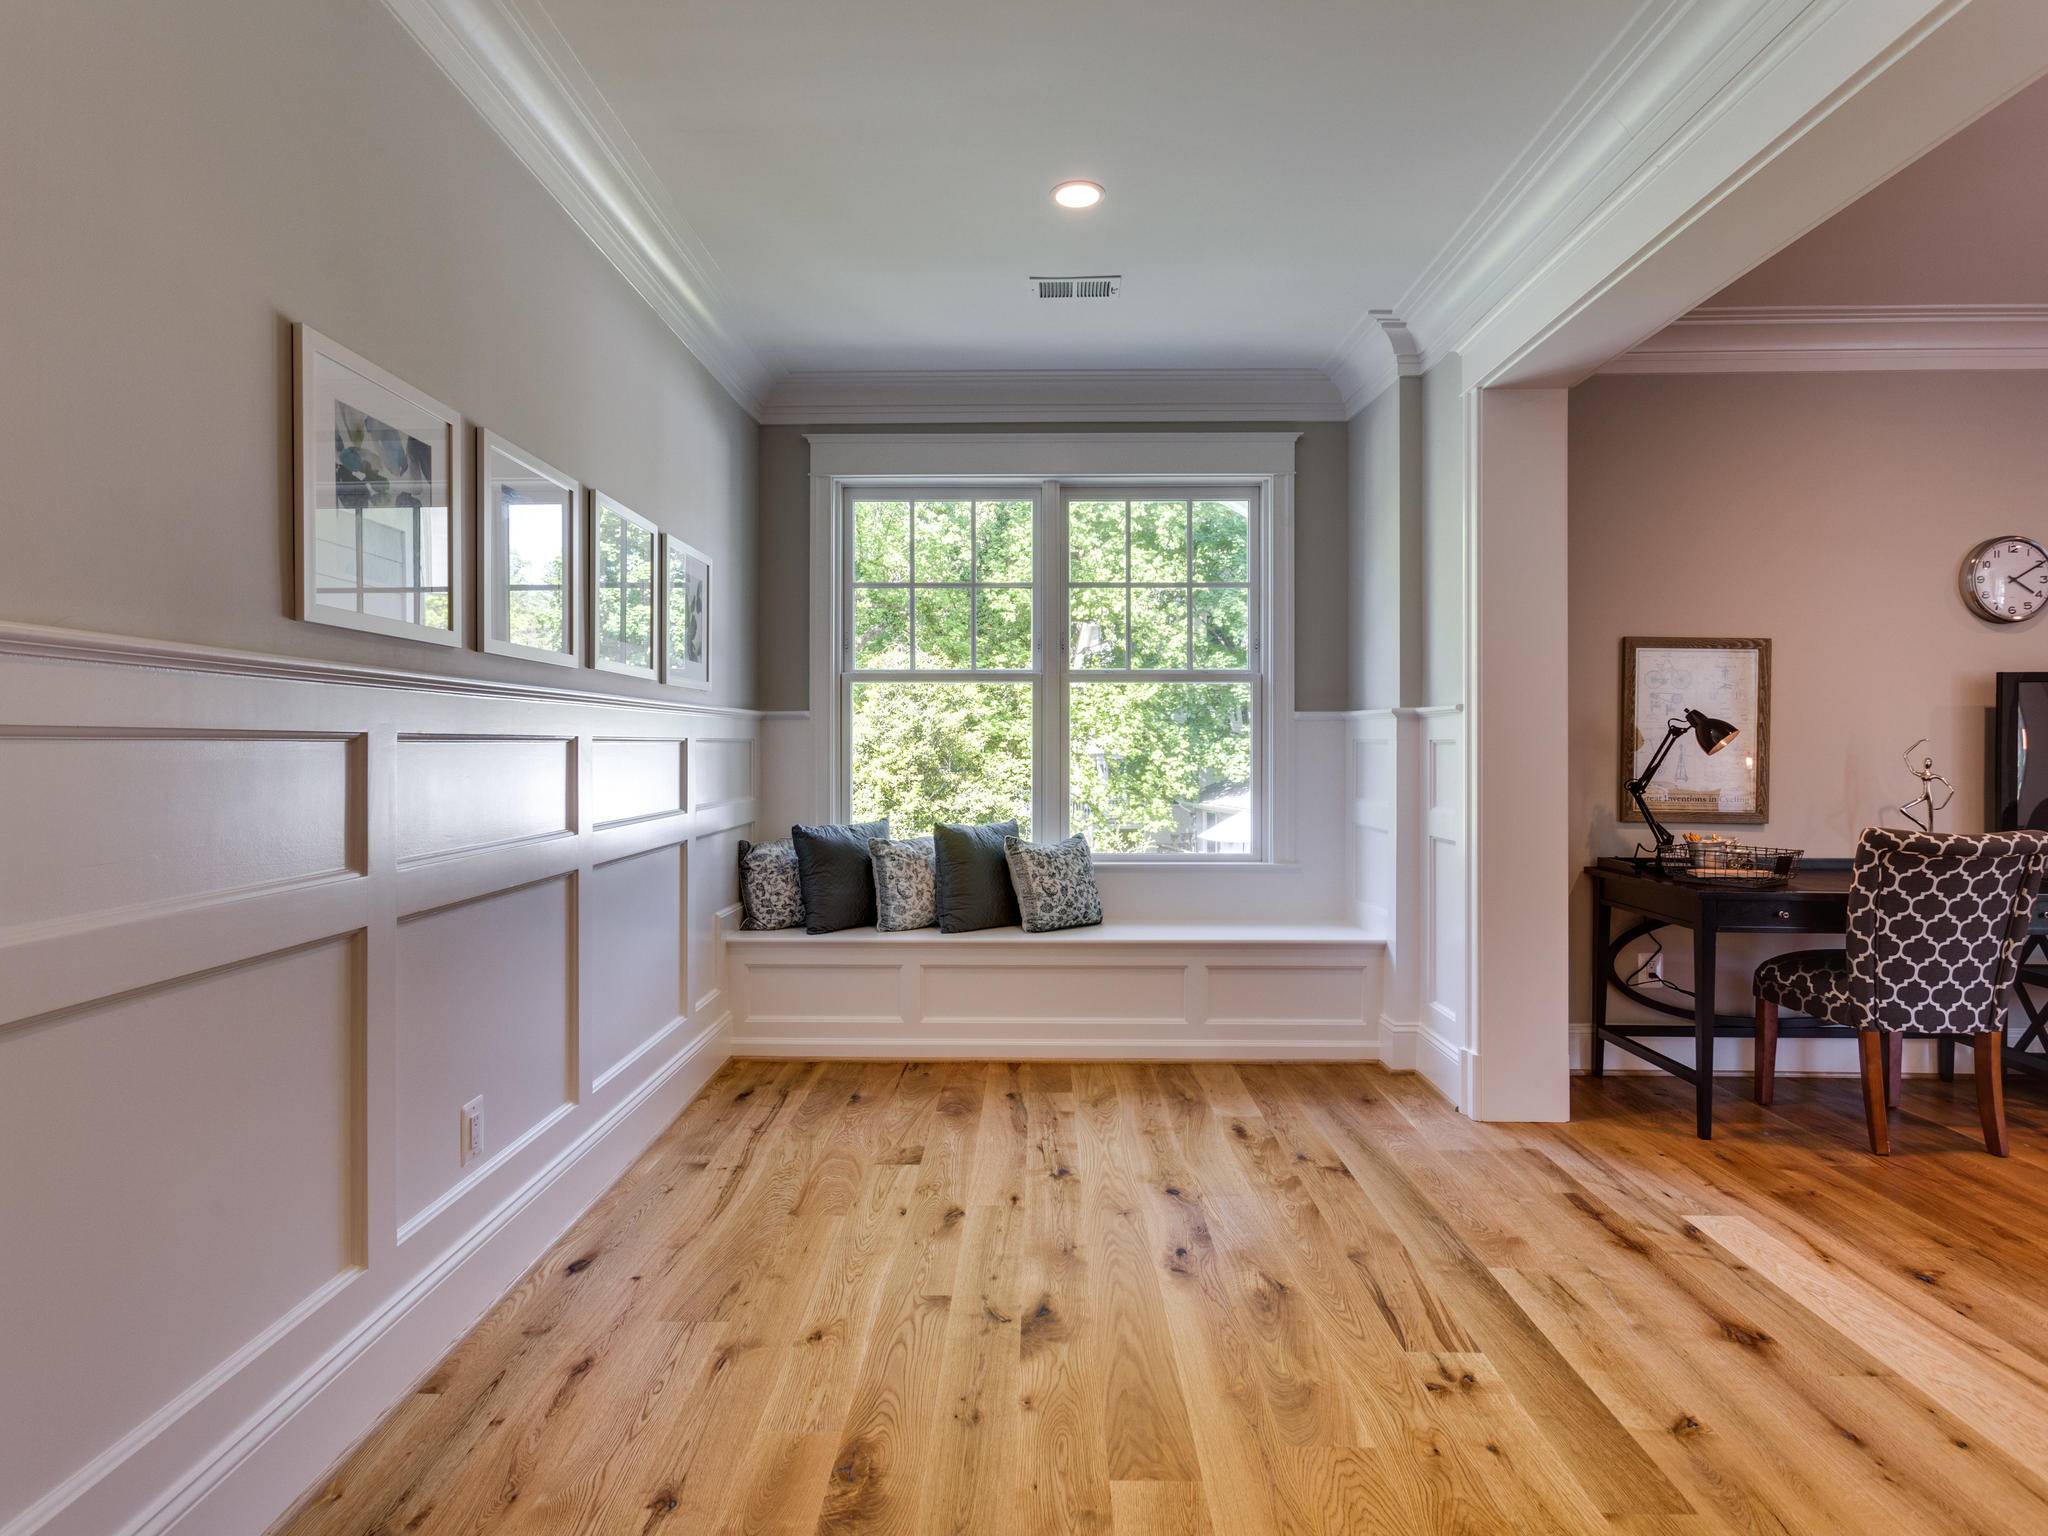 Image of Live Sawn White Oak in New Remote Home Office space